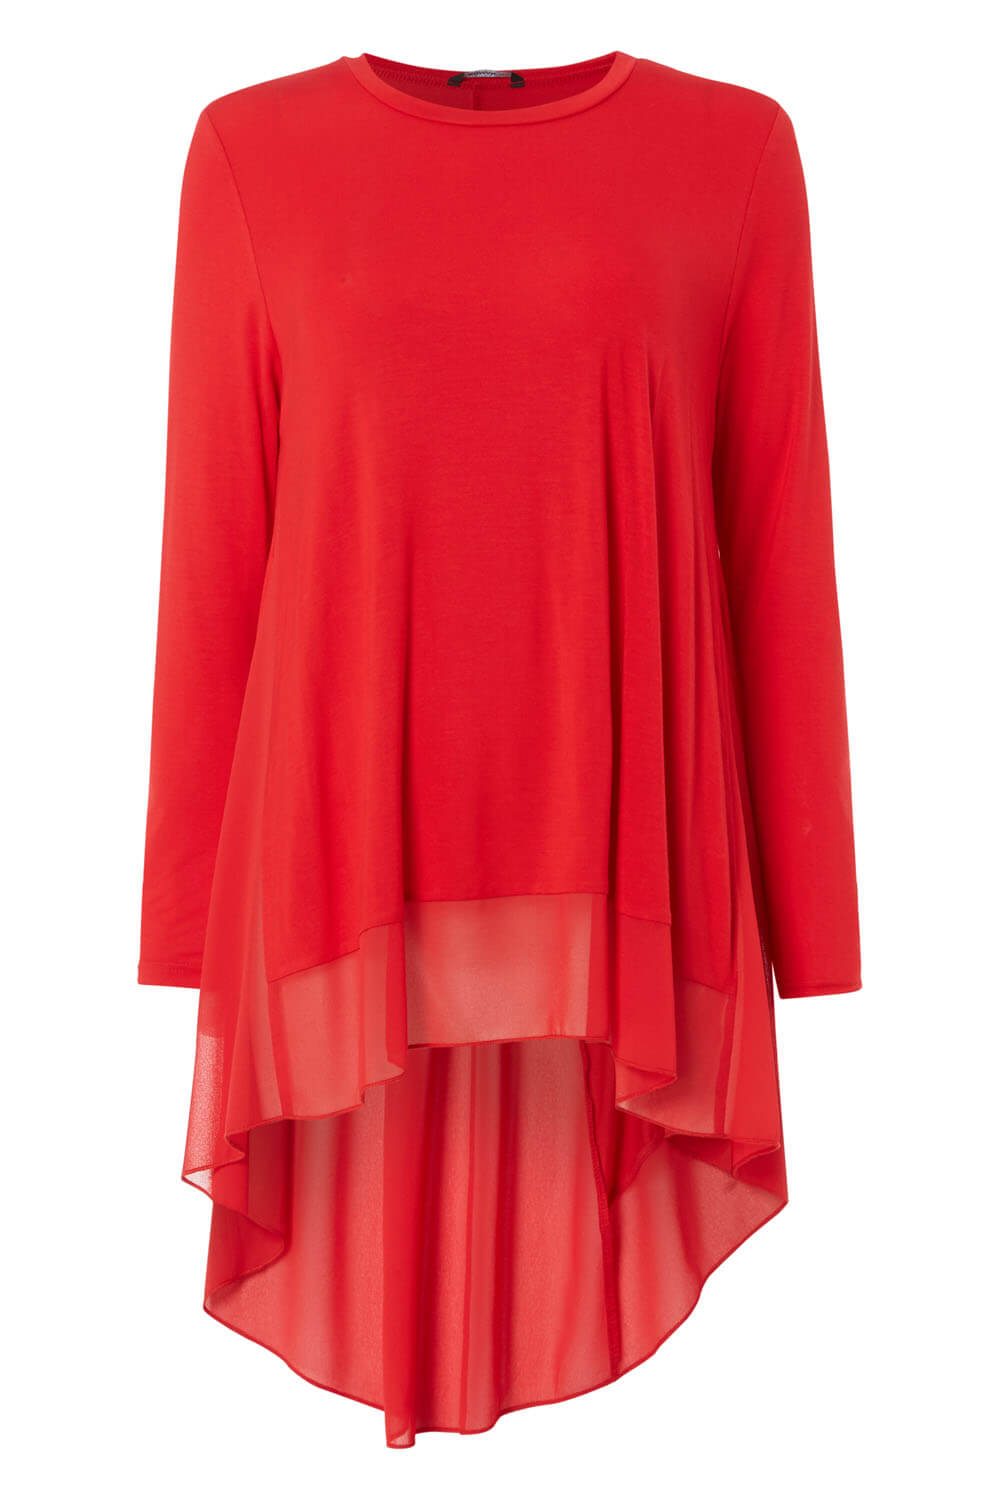 Red Floaty Long Sleeve Dipped Hem Chiffon Detail Top, Image 5 of 5